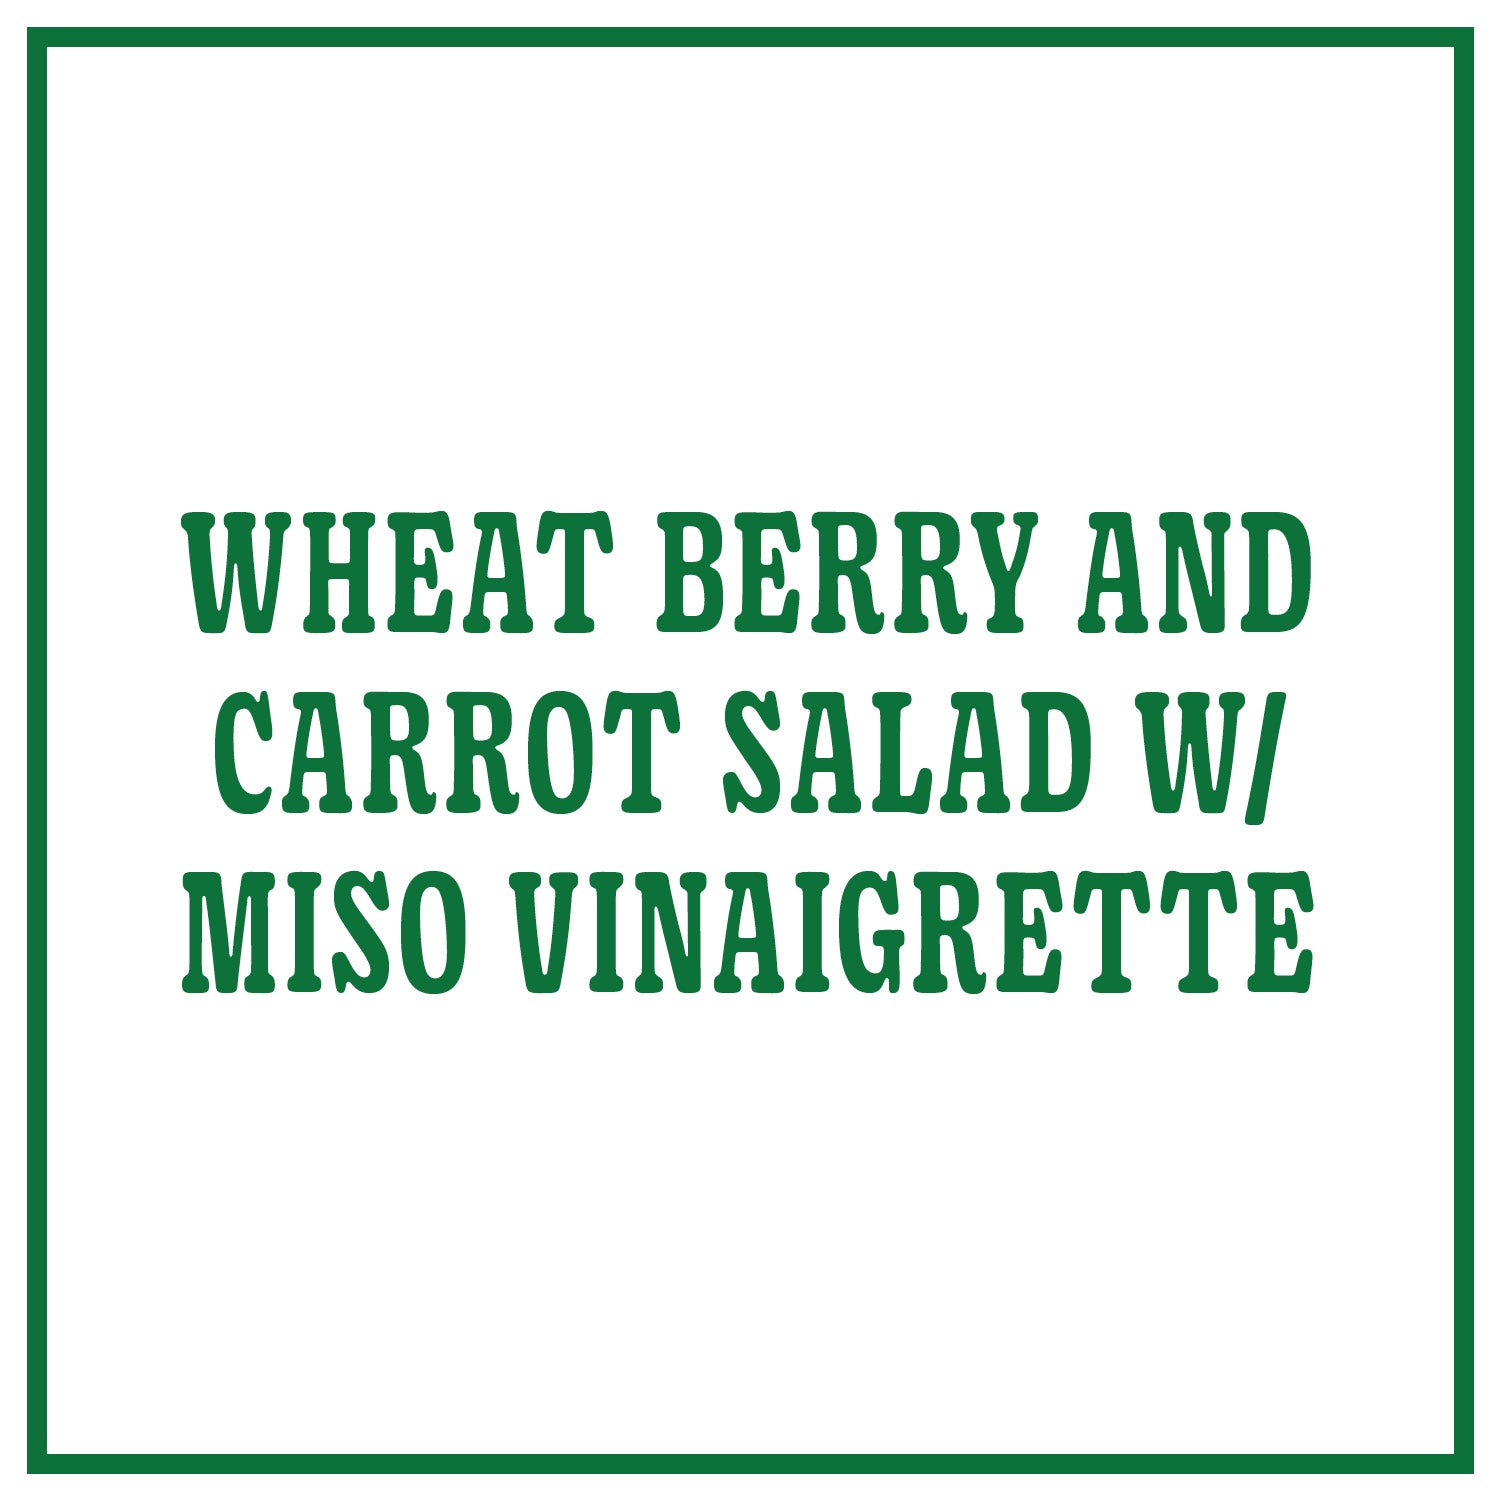 Wheat Berry and Carrot Salad with Miso Vinaigrette